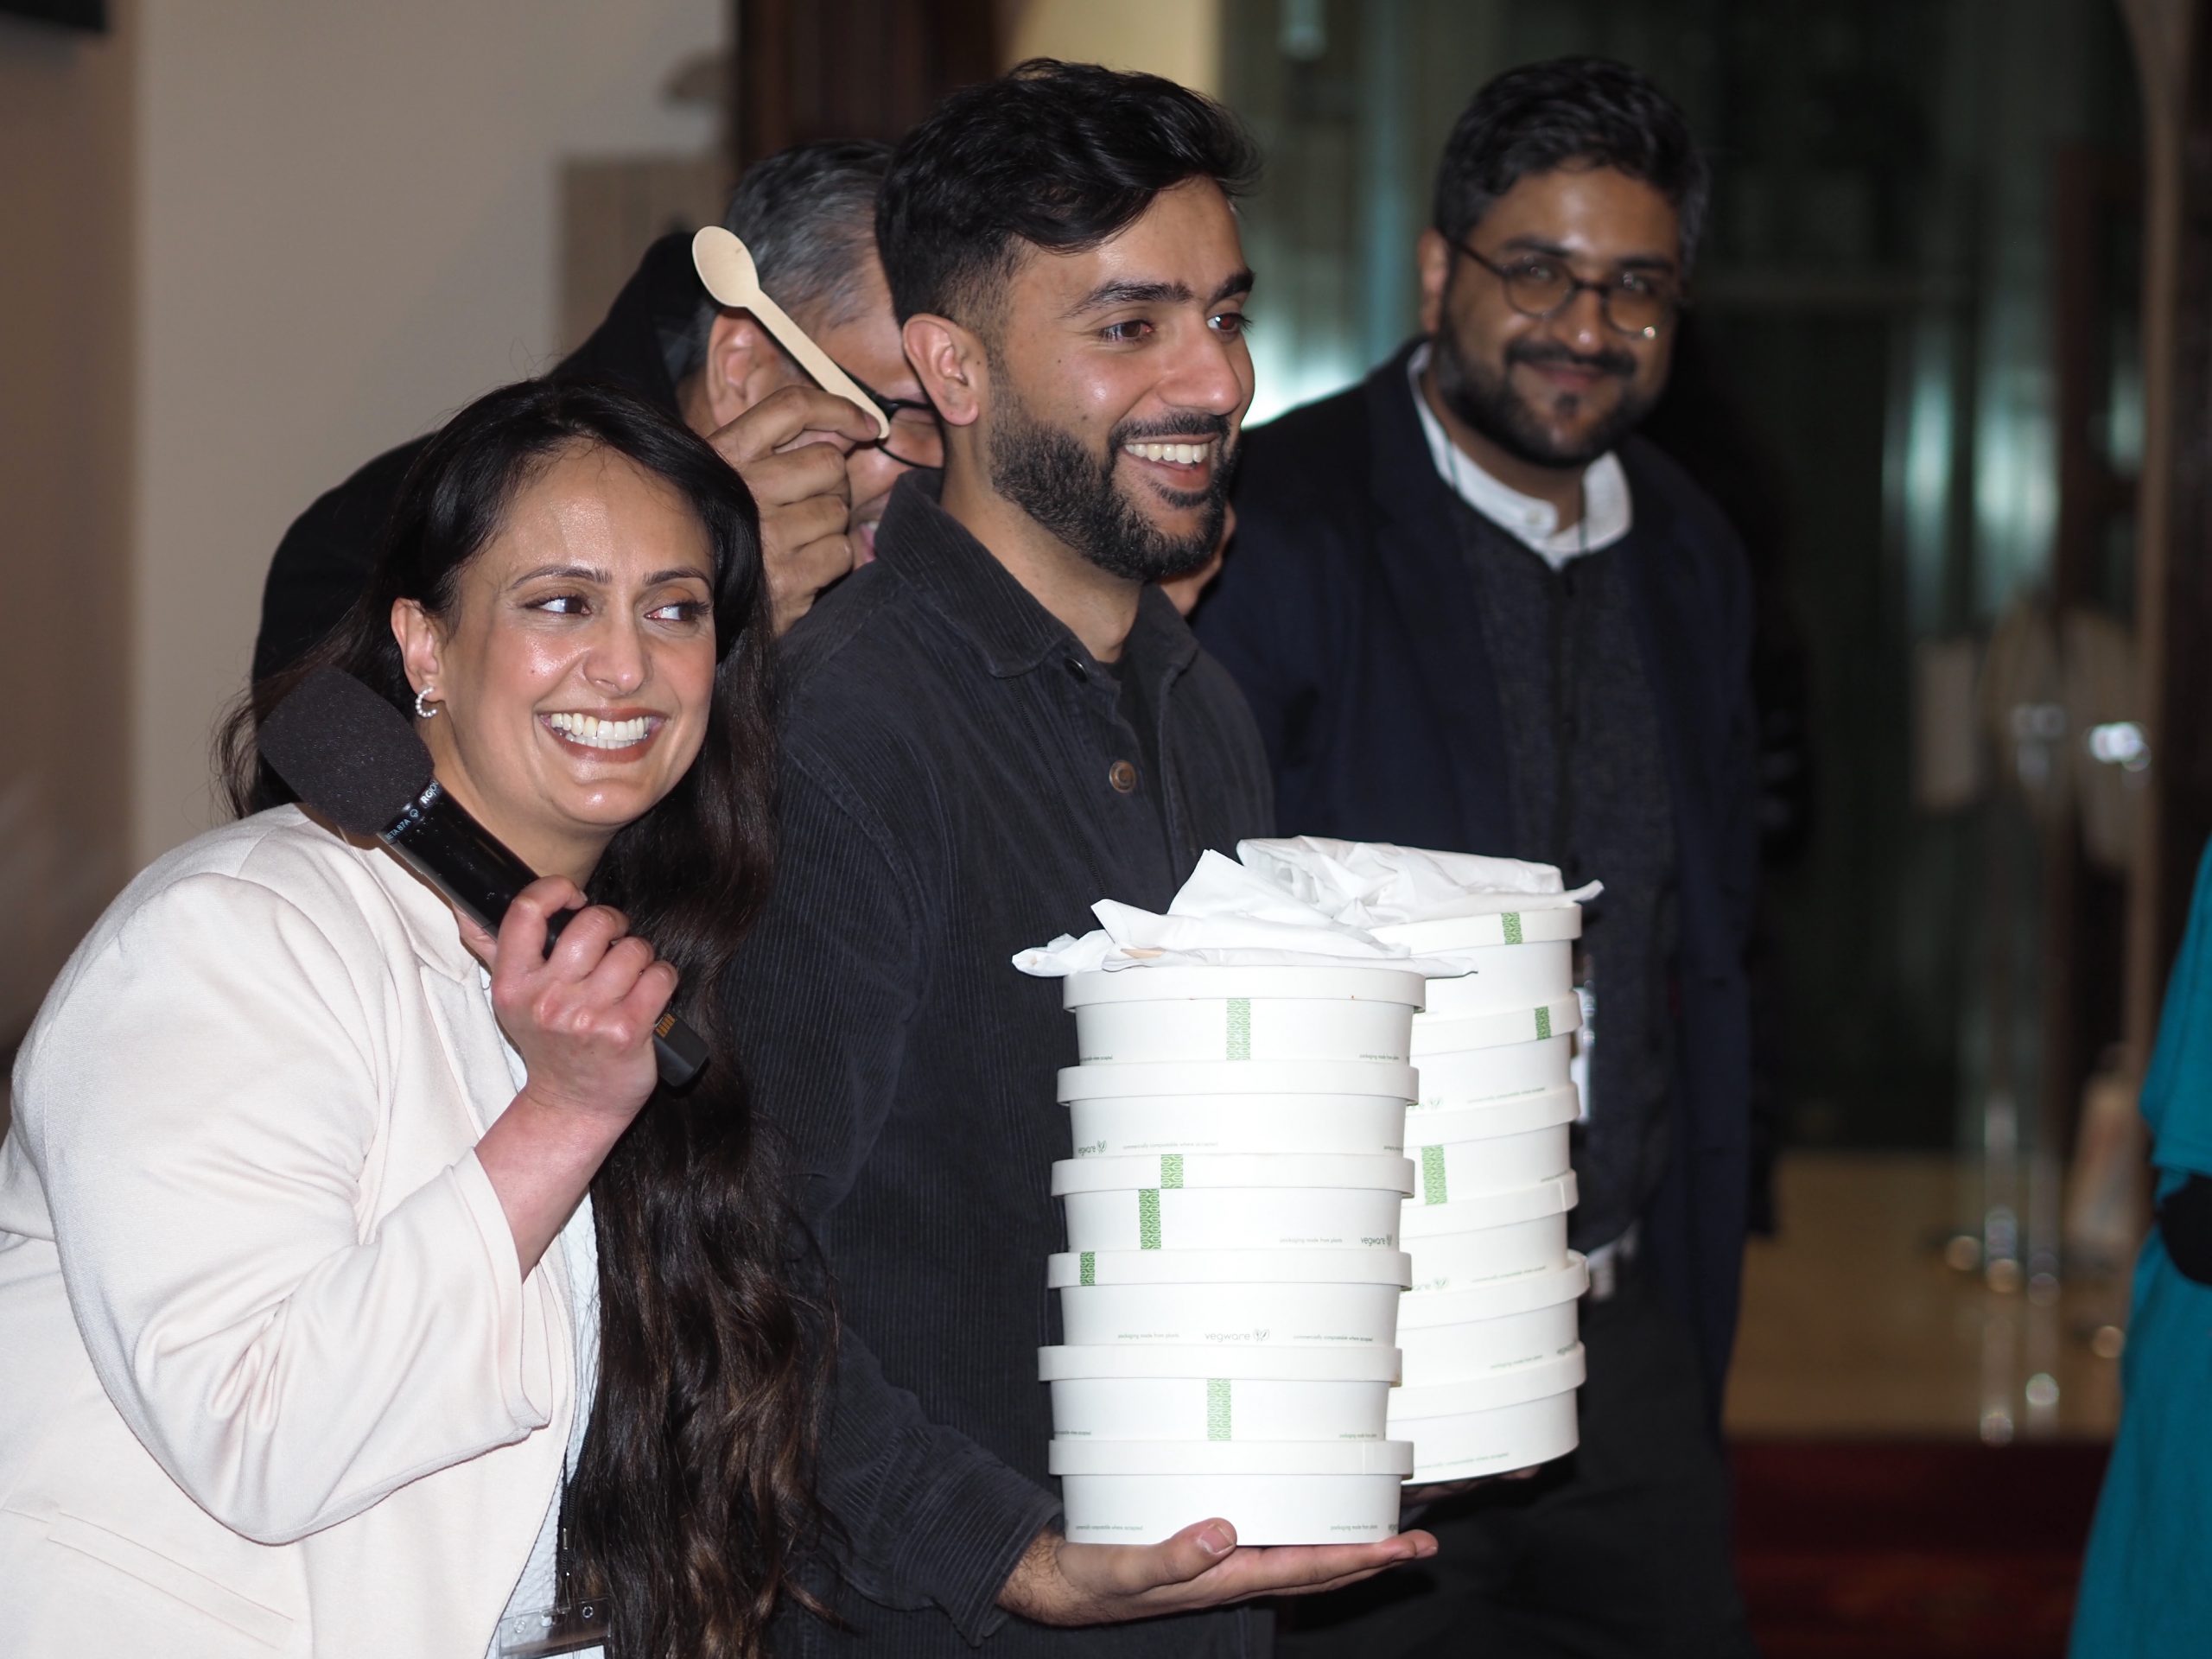 London's Guildhall Old Library Hosts Ramadan Iftar - About Islam